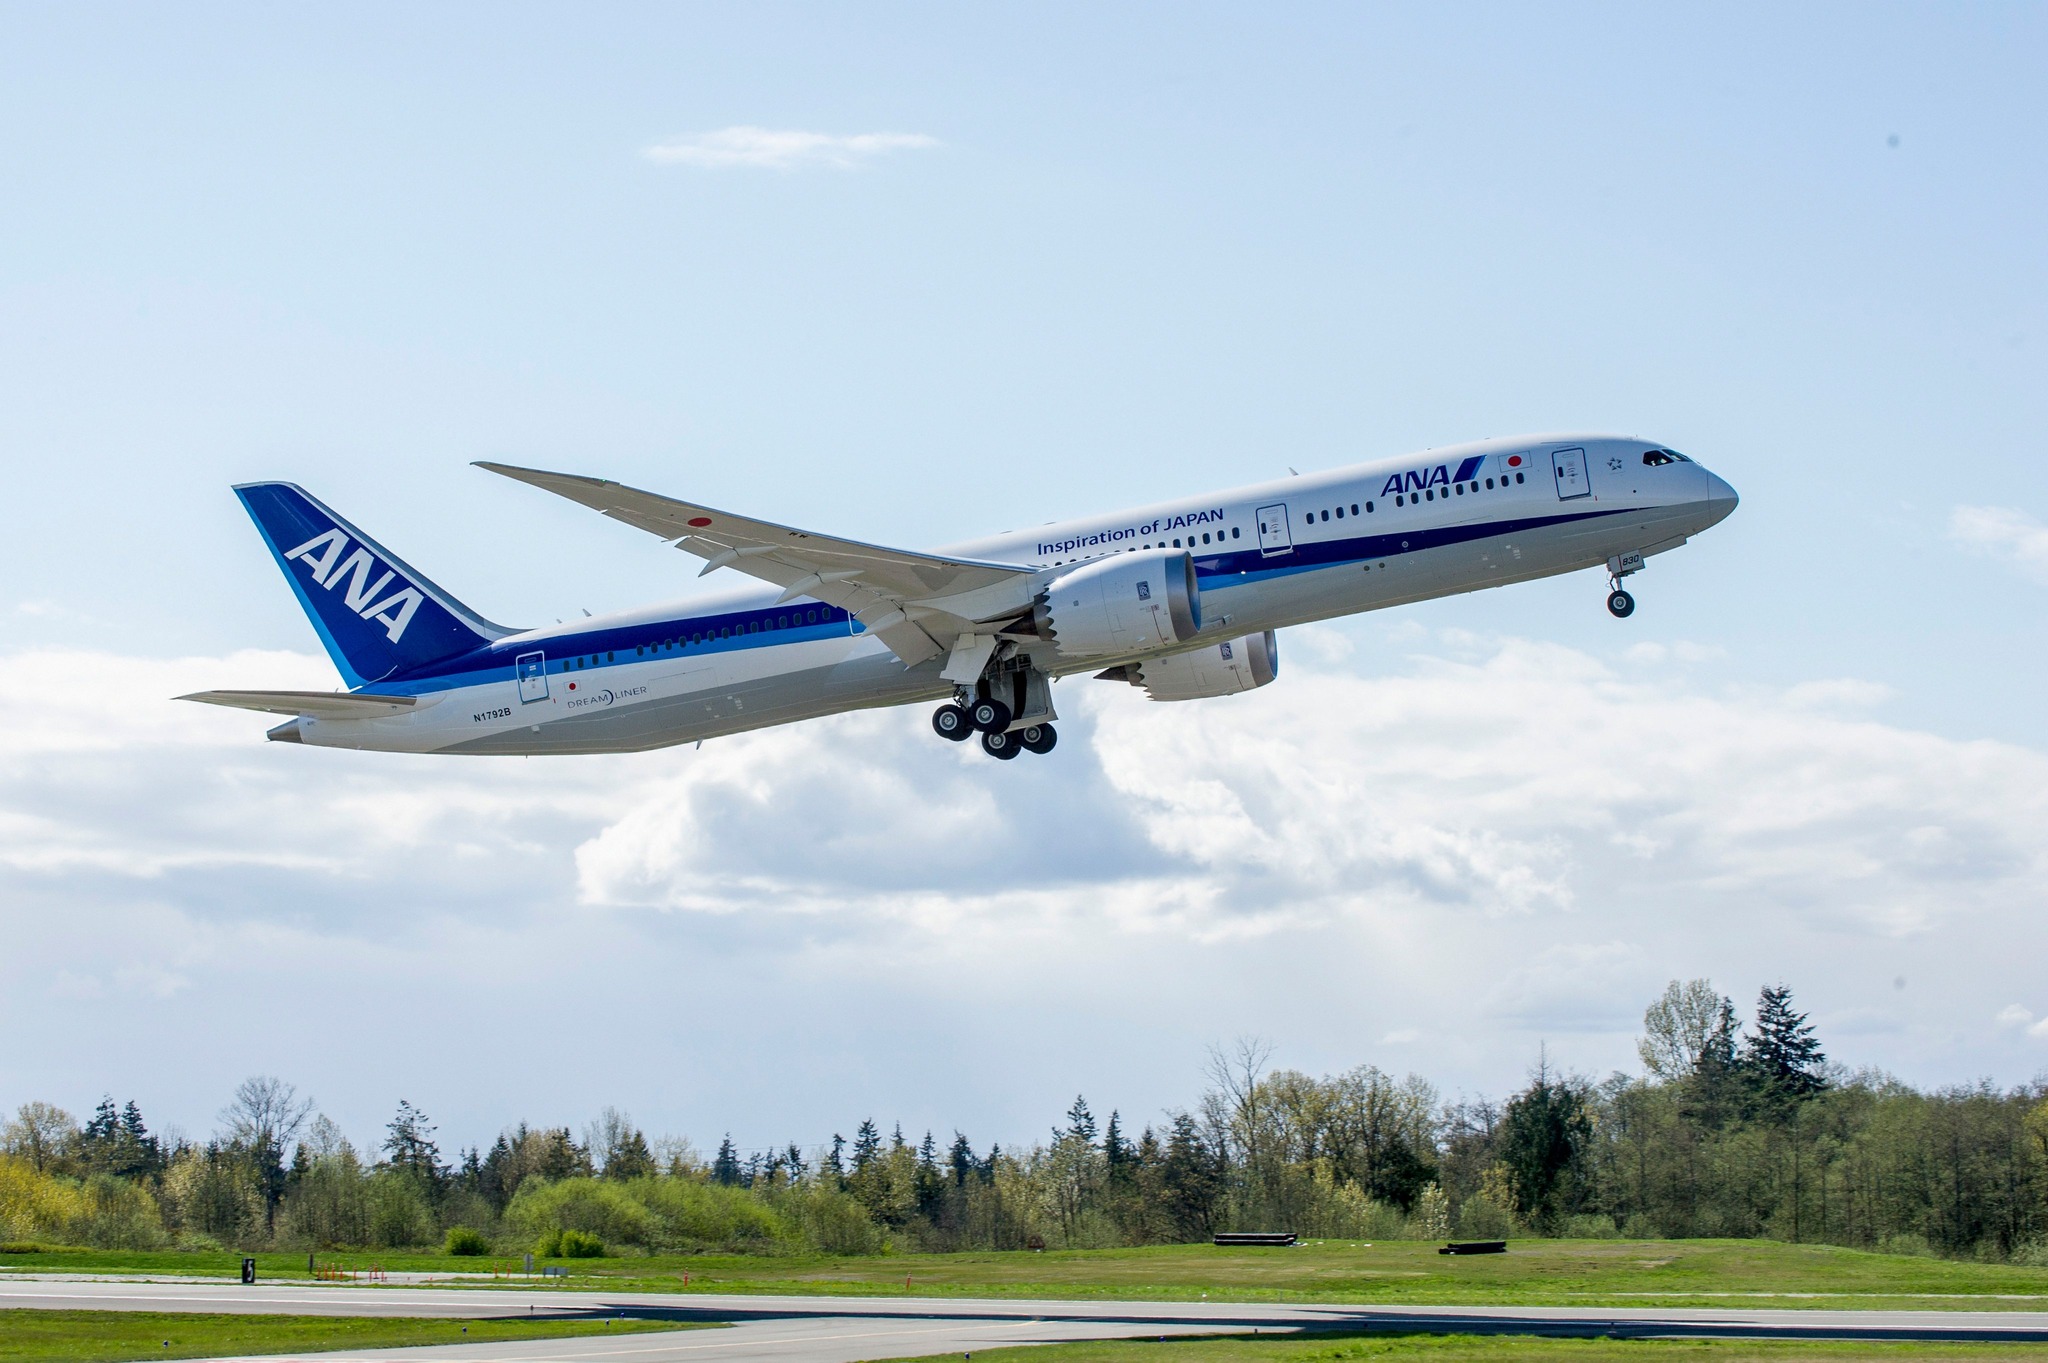 ANA flies high in on-time global airline report; industry faces staffing shortage